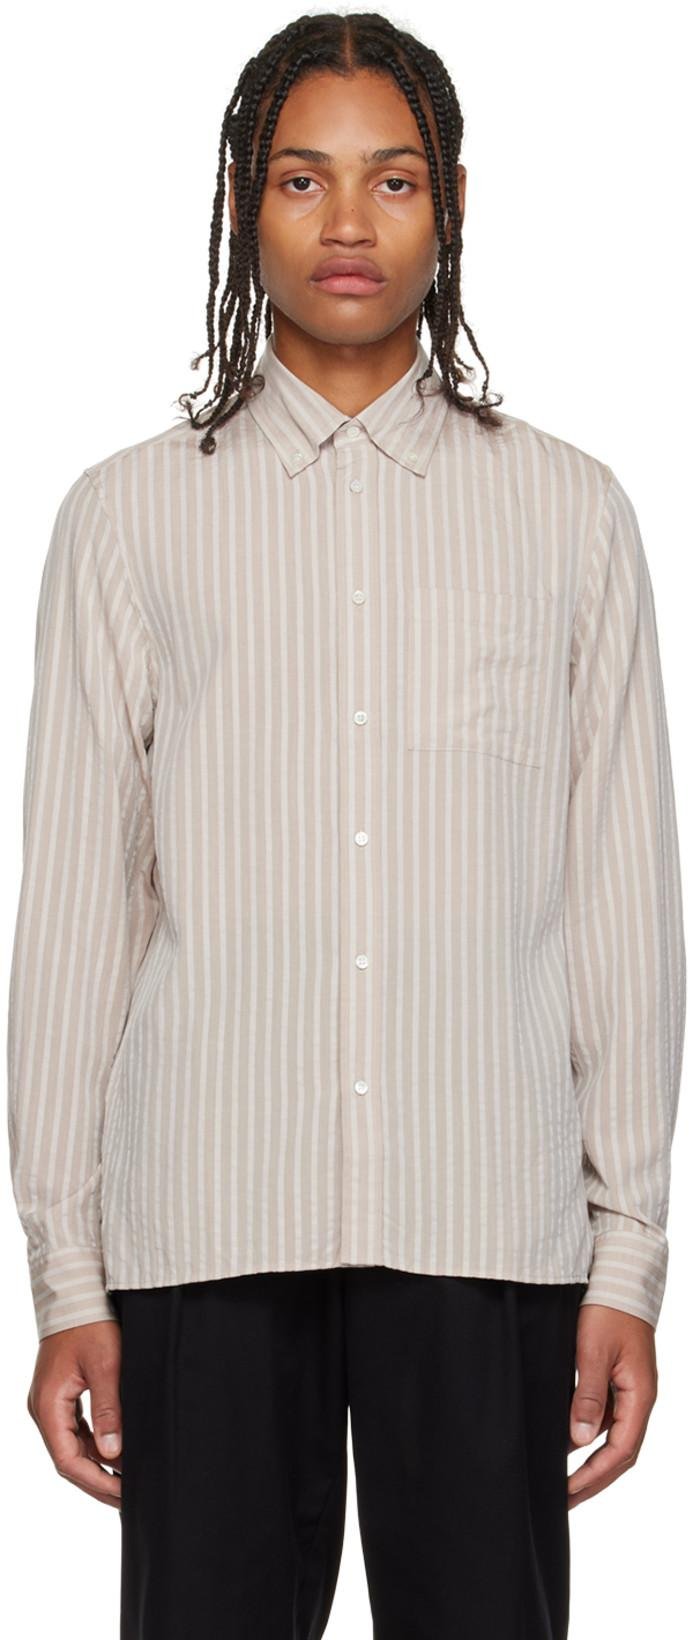 Beige Stripe Shirt by ANOTHER ASPECT